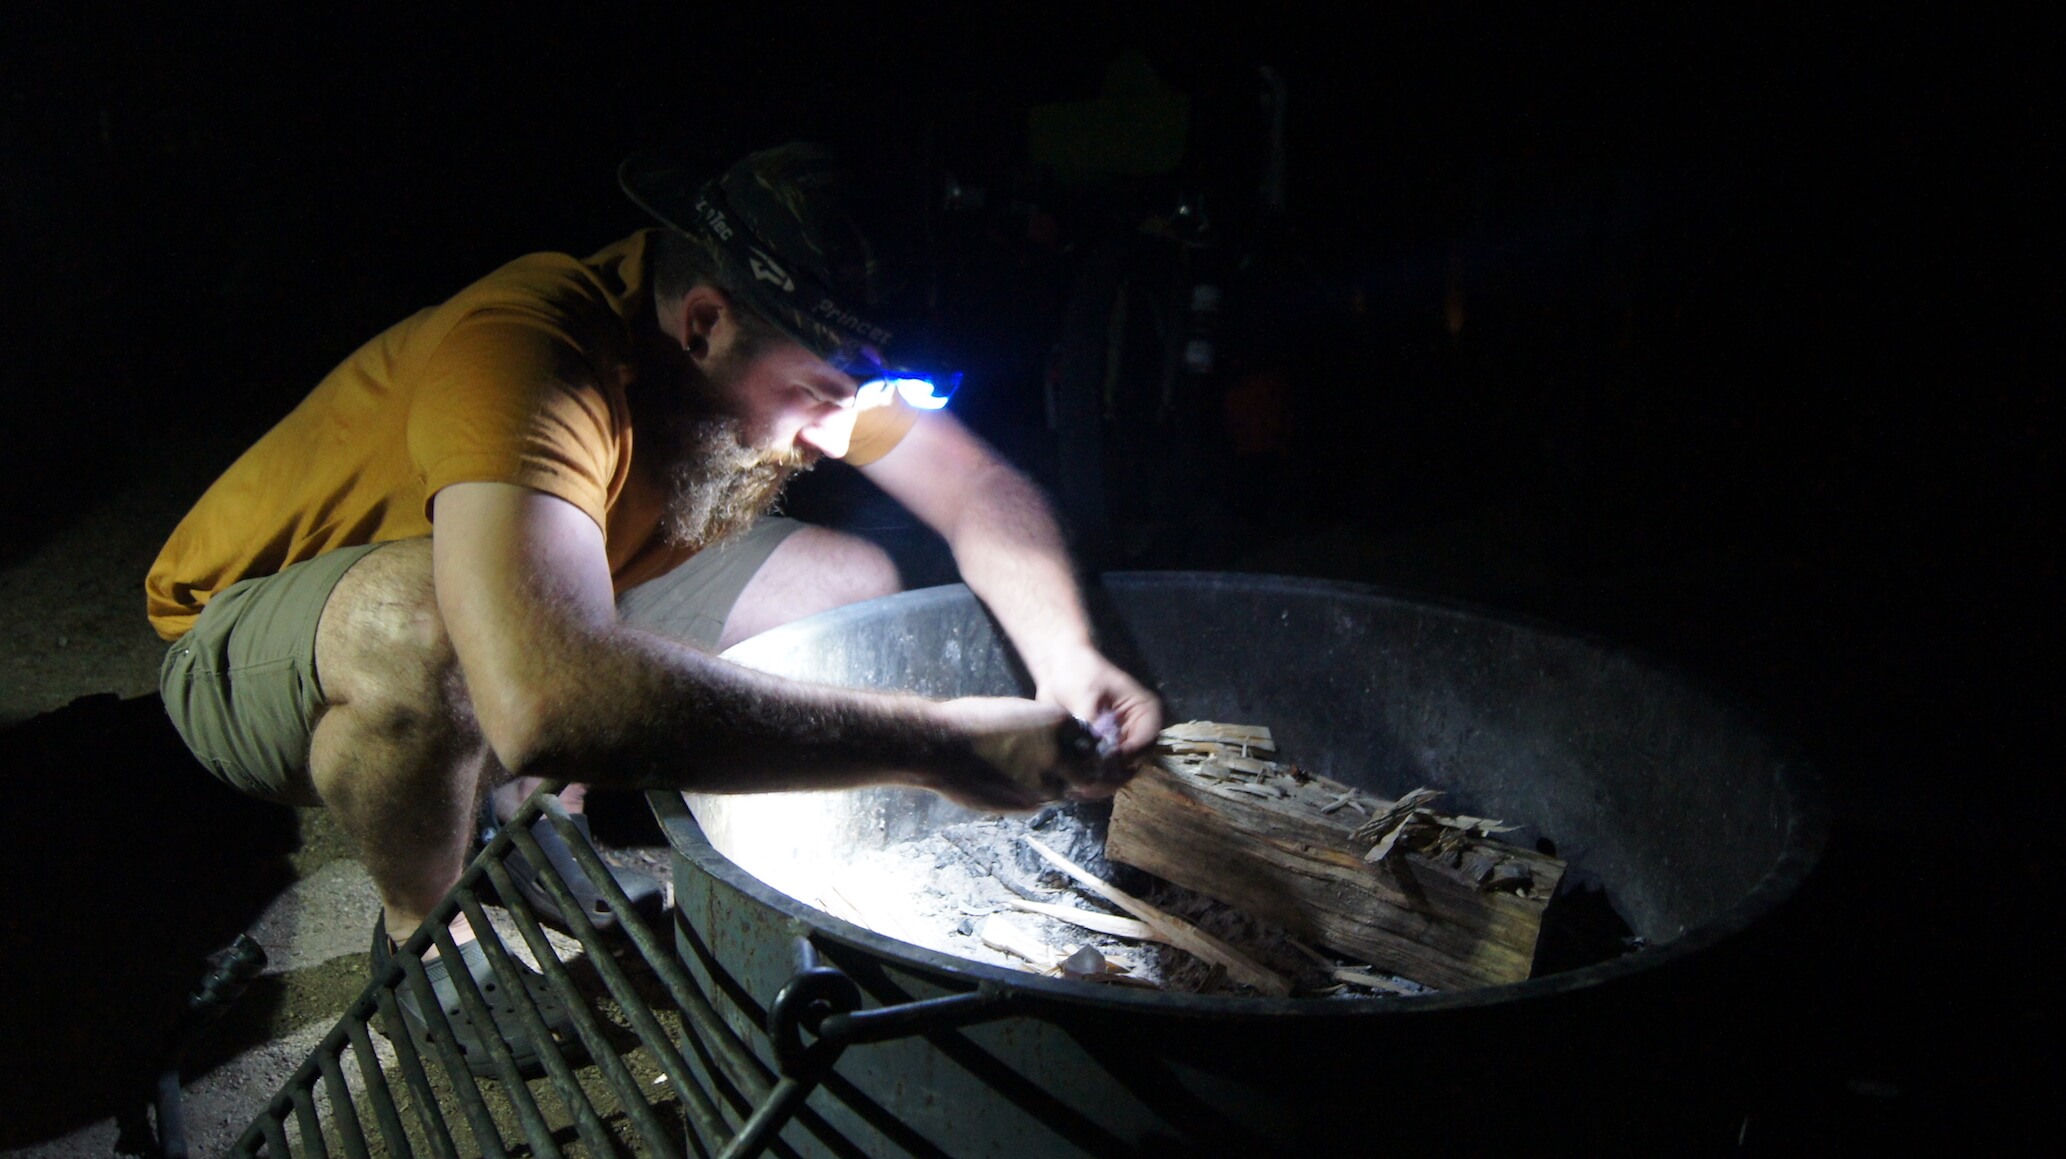 A person wearing a headlamp, squats over a campfire ring at night